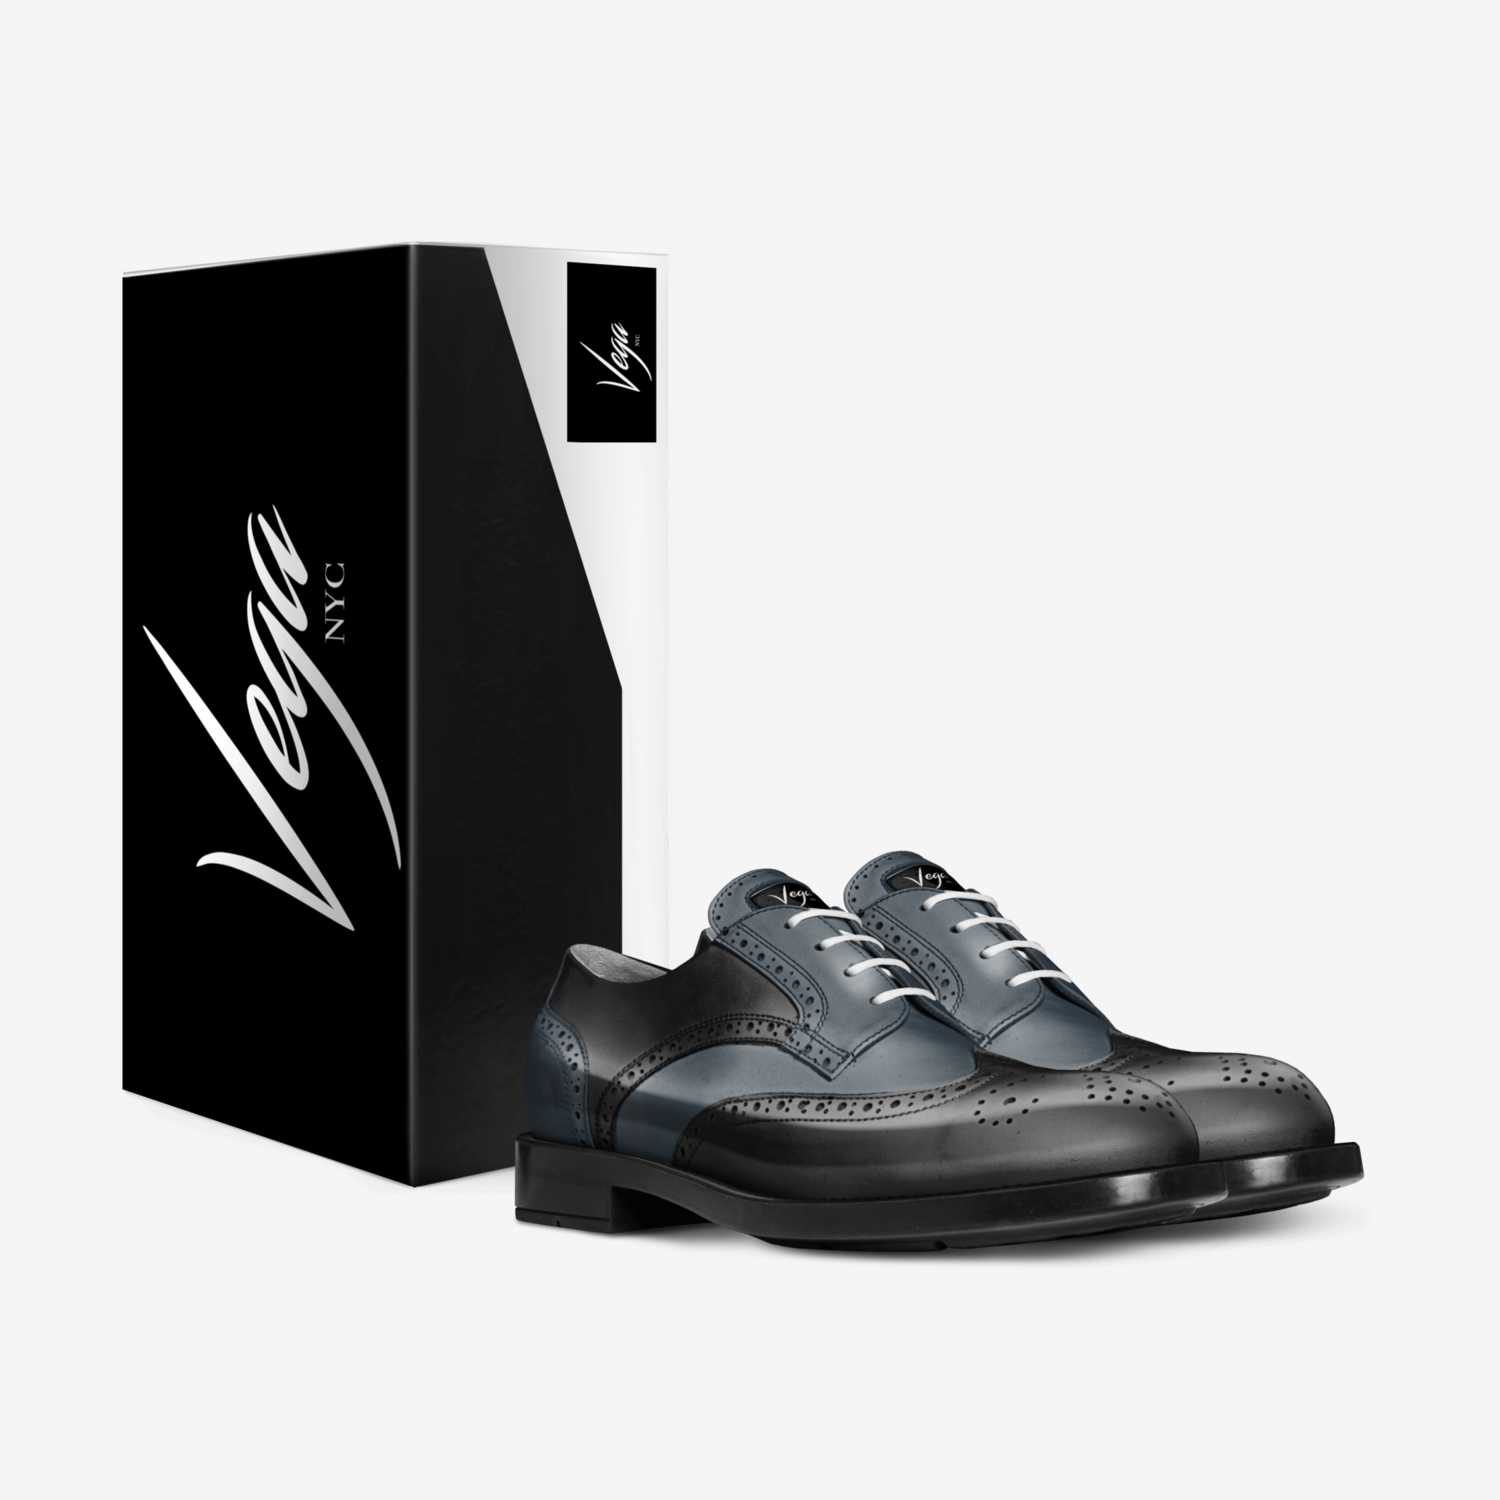 Aristo 1 custom made in Italy shoes by Vega Nyc | Box view